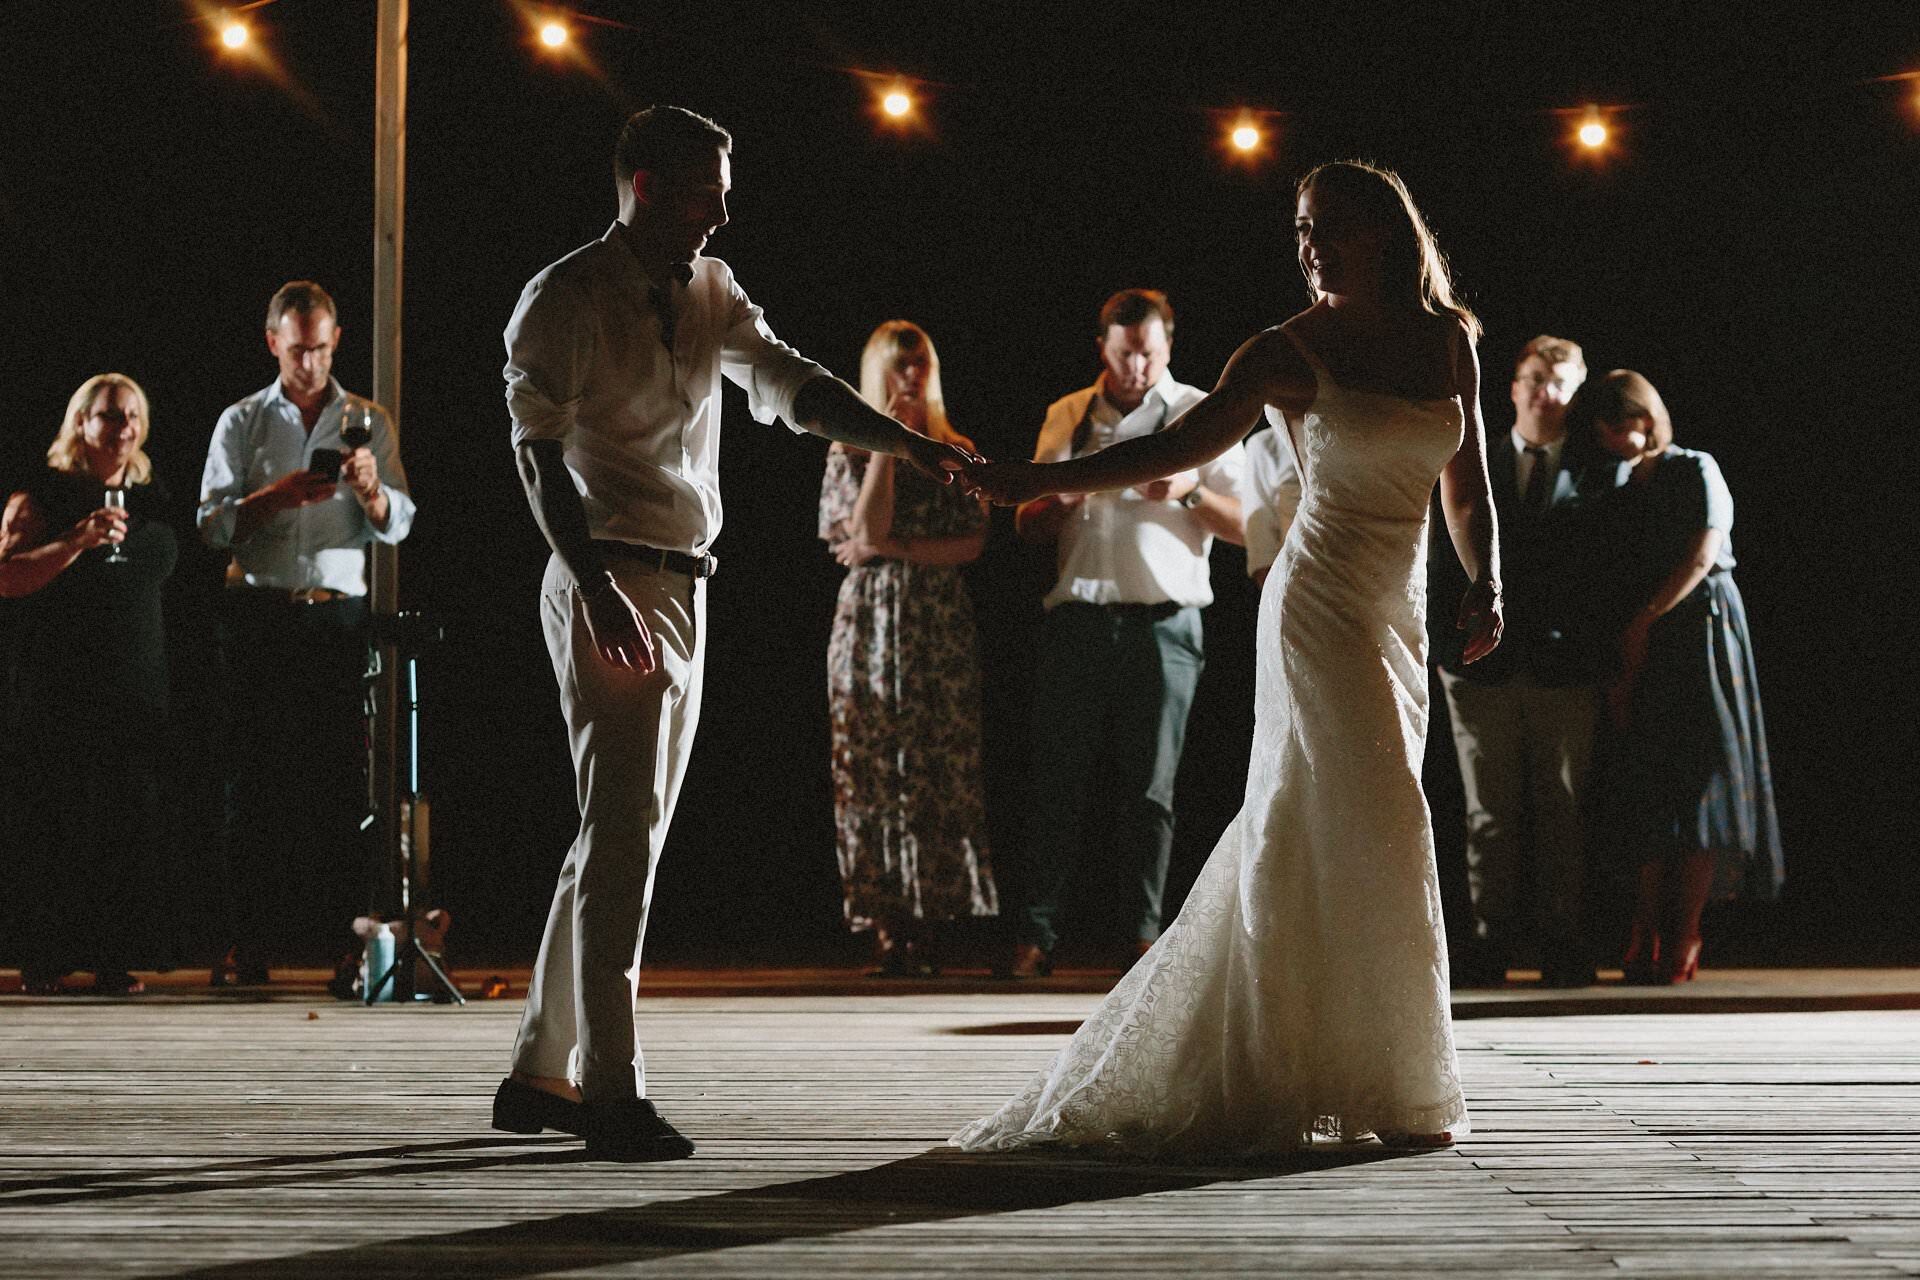 first dance outside at night